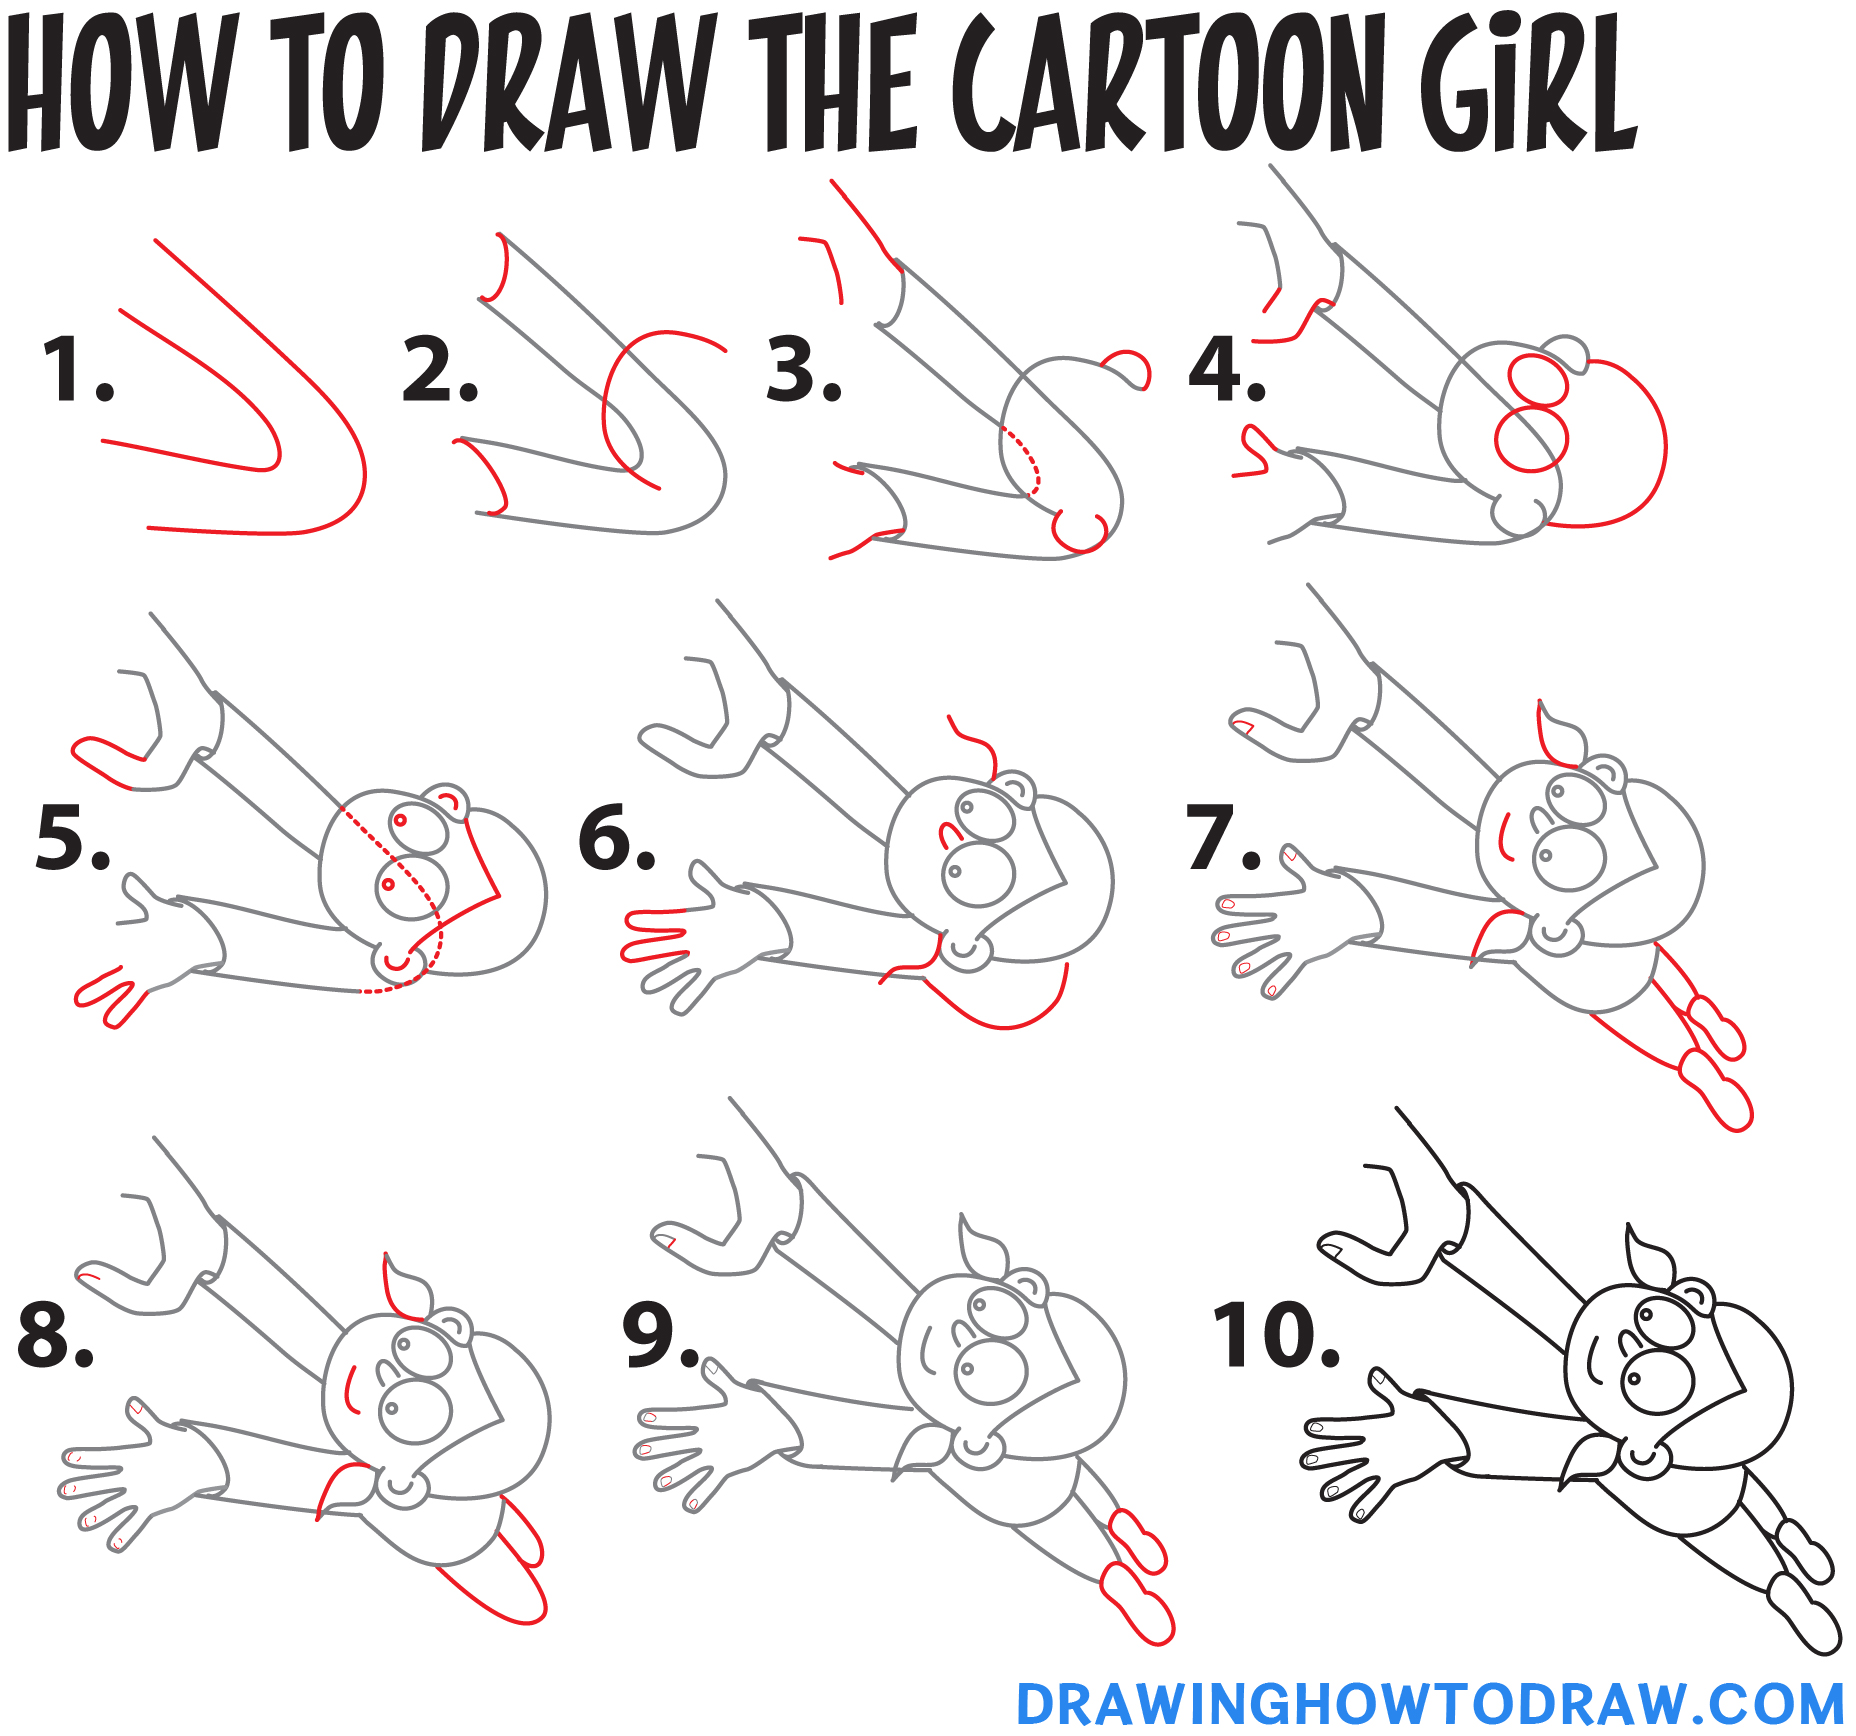 Step 1 B: How to Draw the Cartoon Girl Step by Step